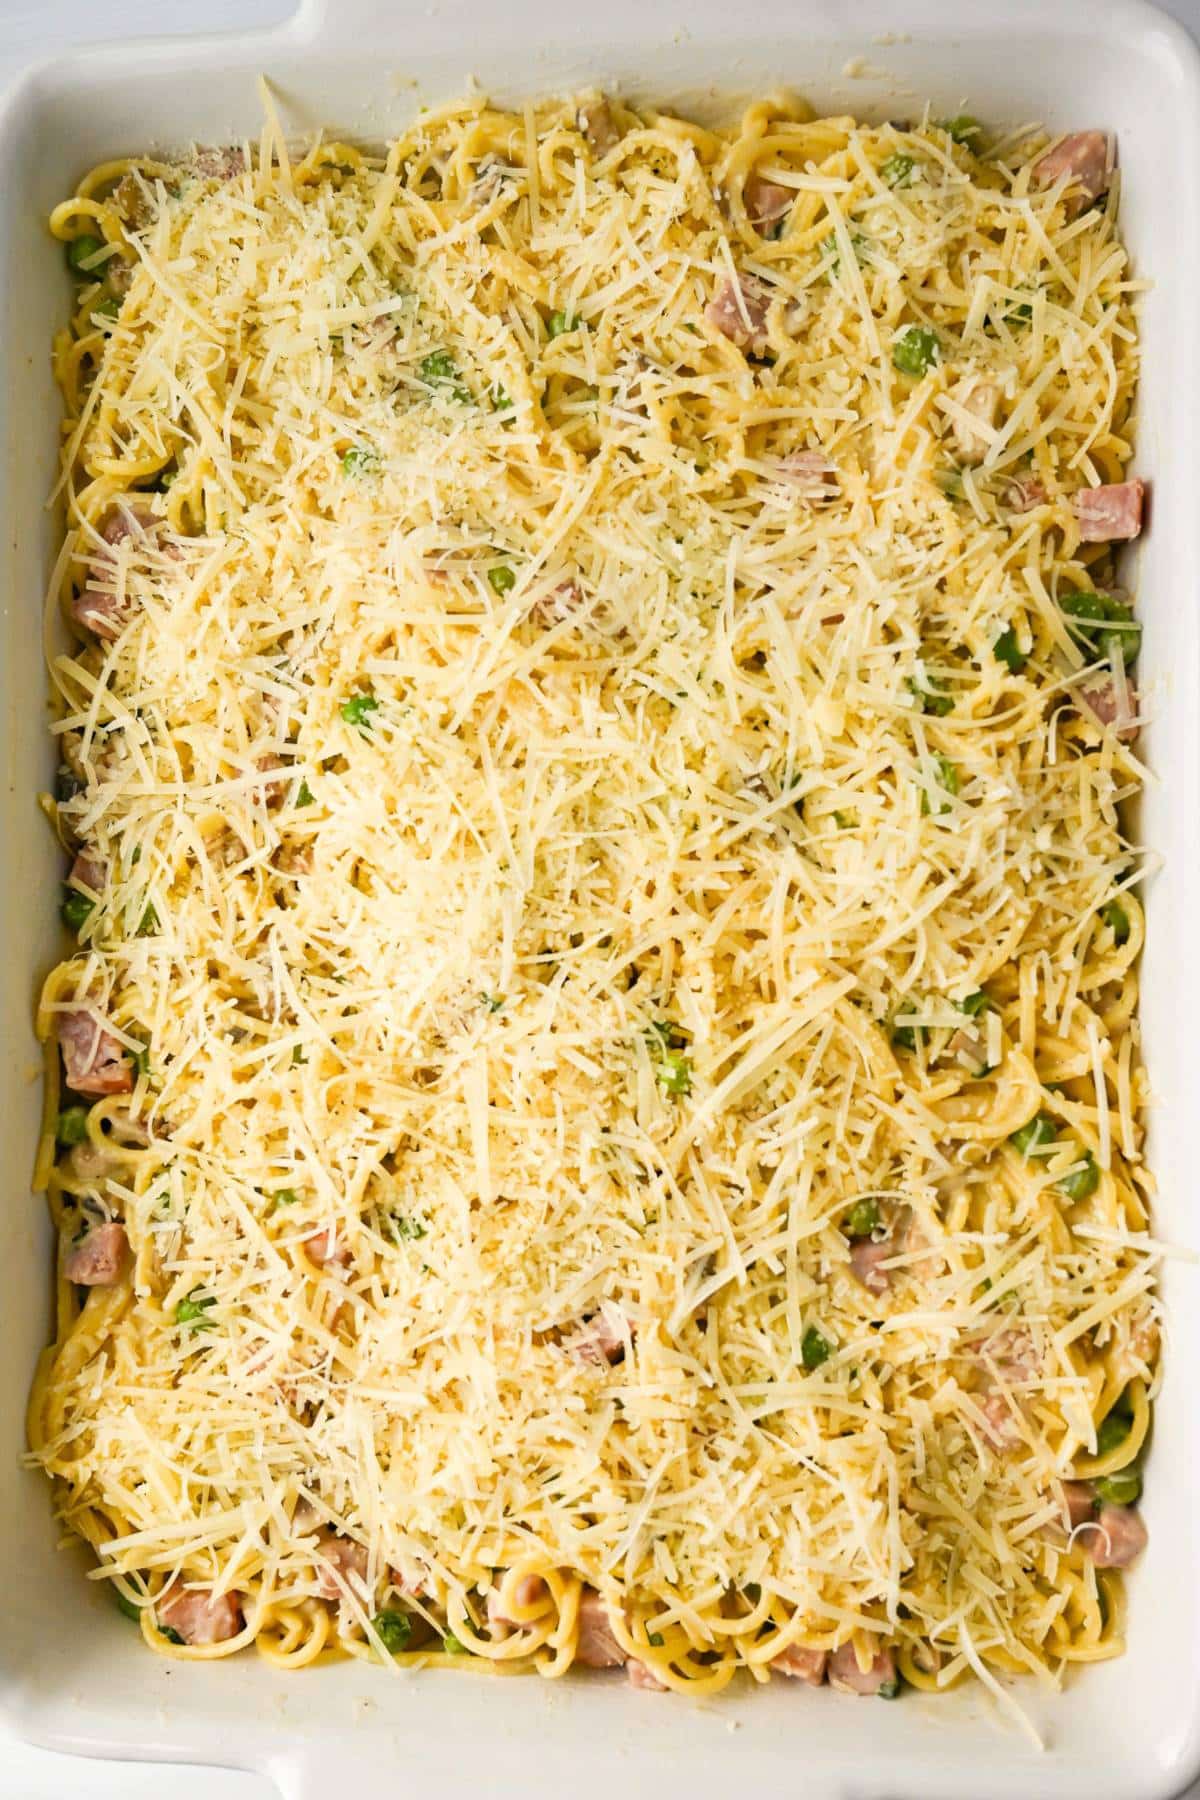 ham casserole with parmesan cheese sprinkled on top ready to bake